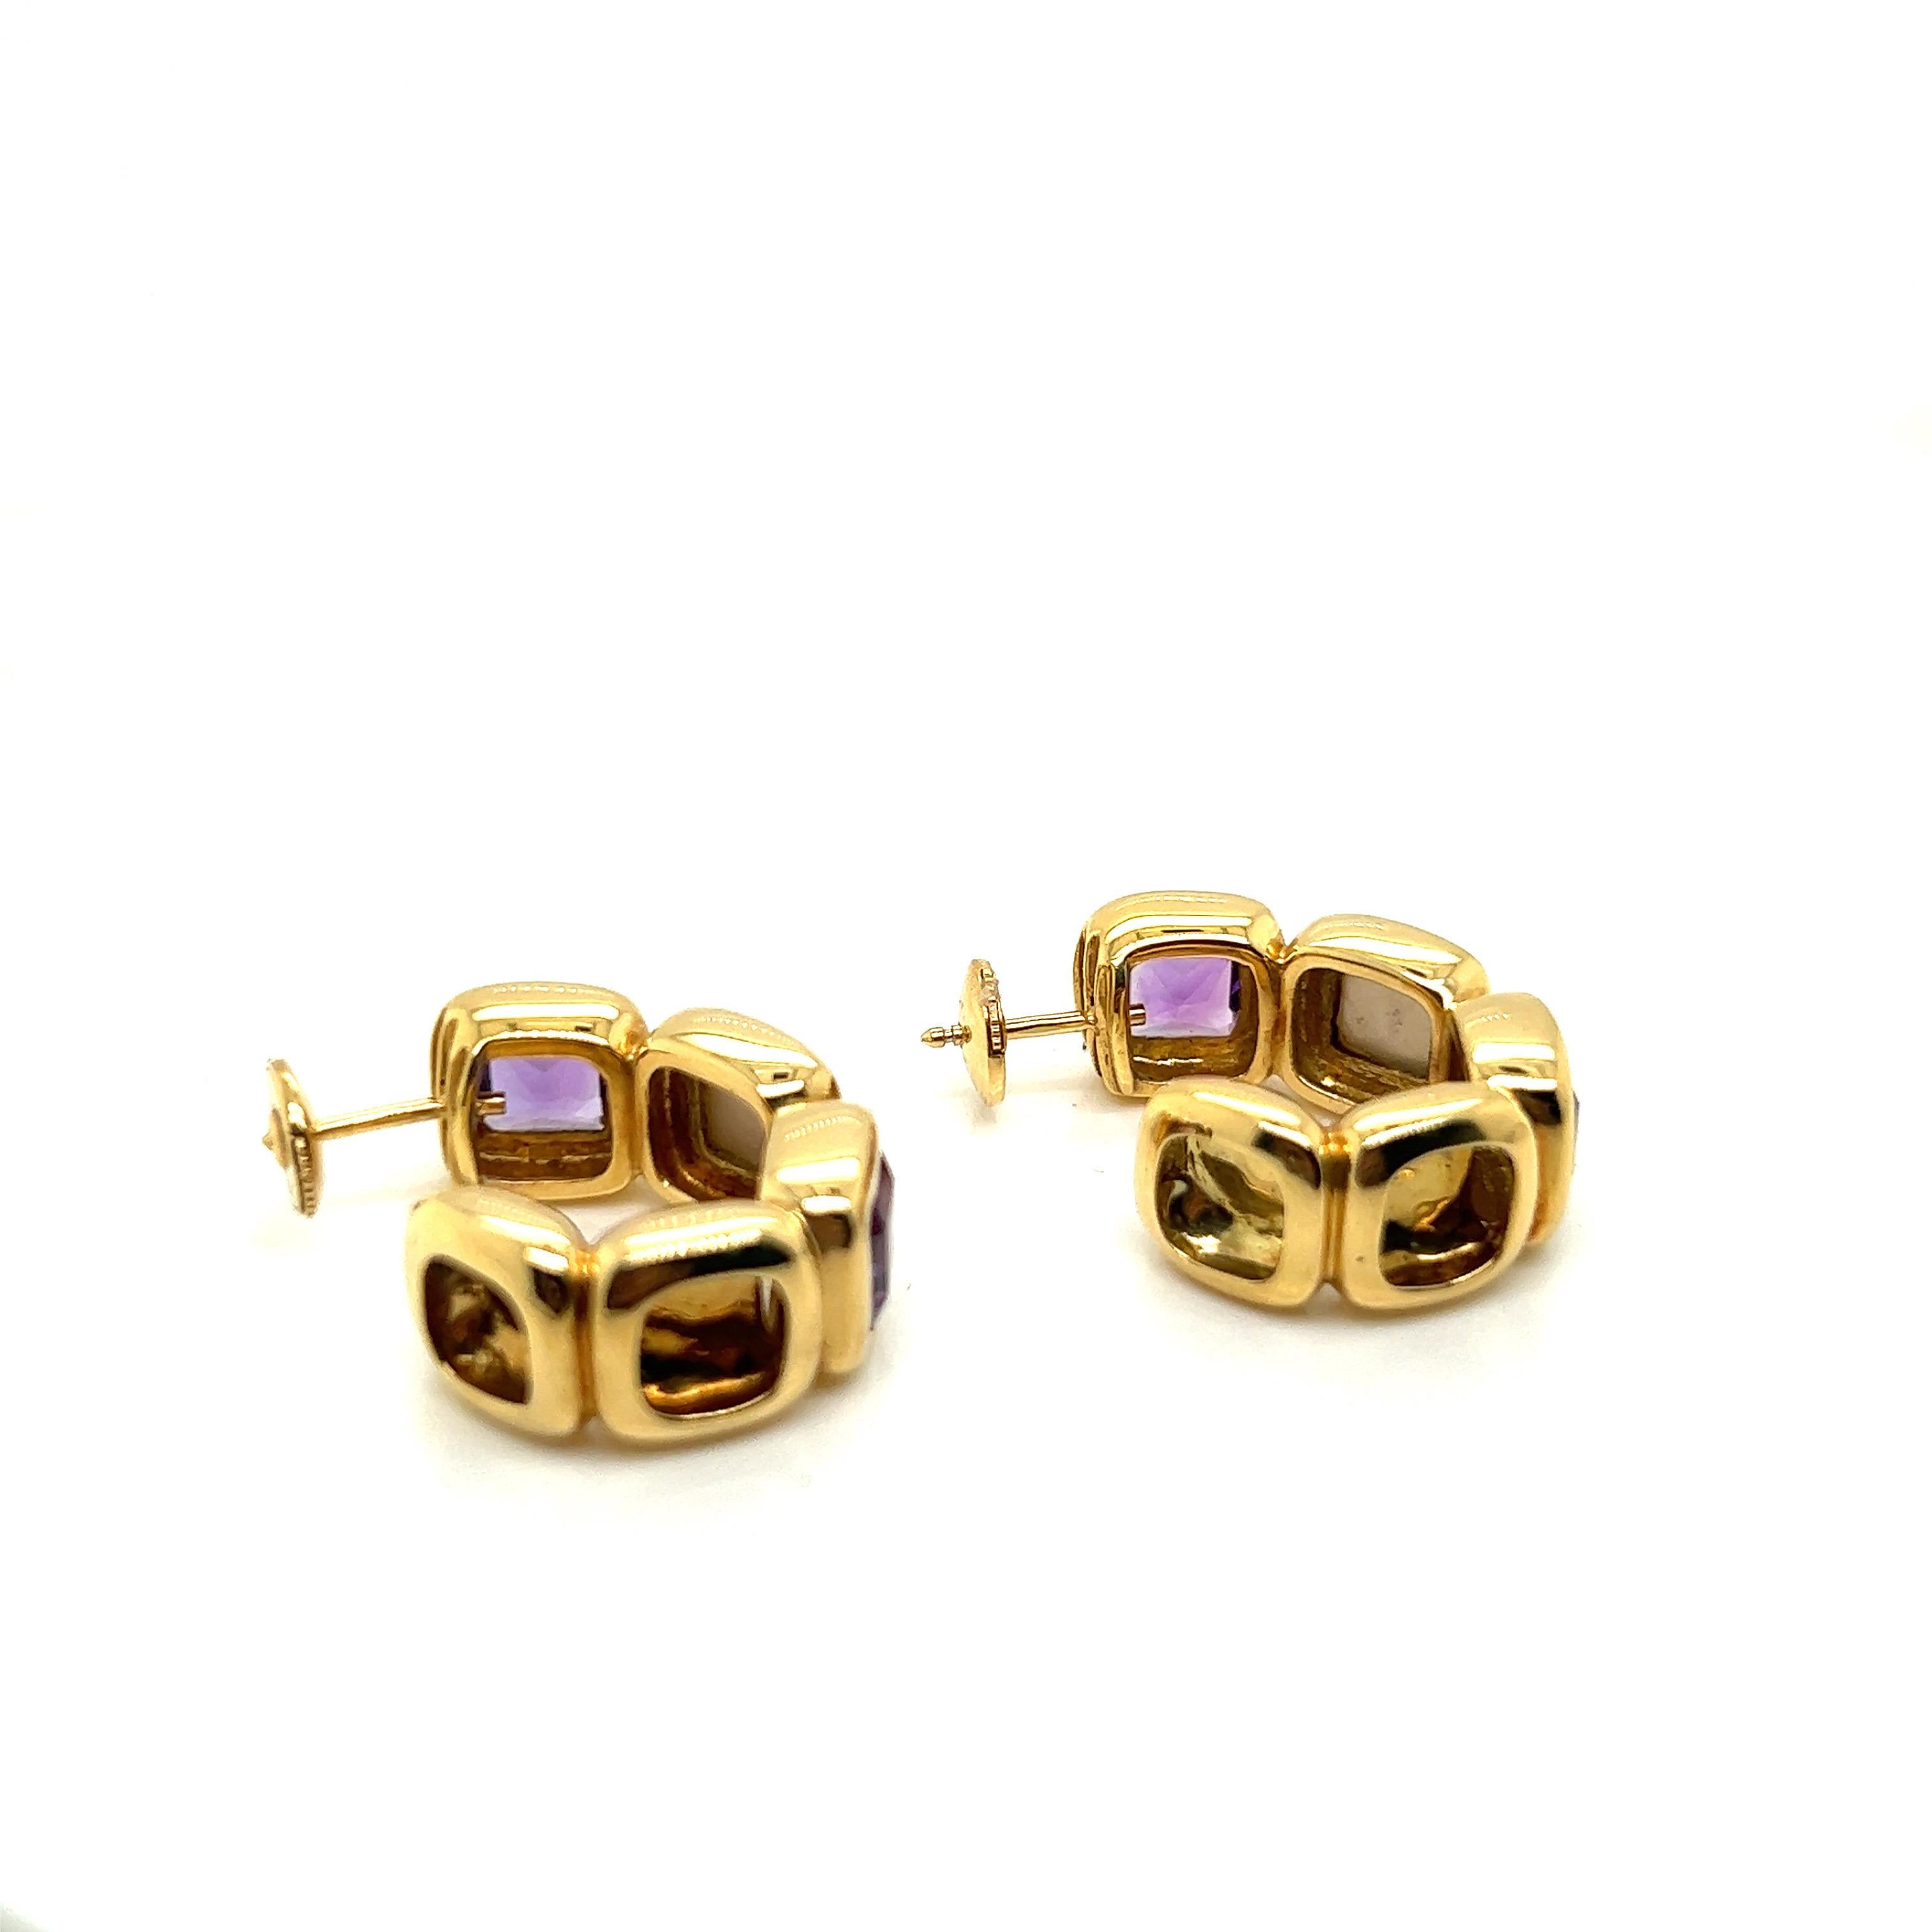 Women's or Men's Vintage Earrings in Yellow Gold, Amethysts and Mother-of-pearl For Sale